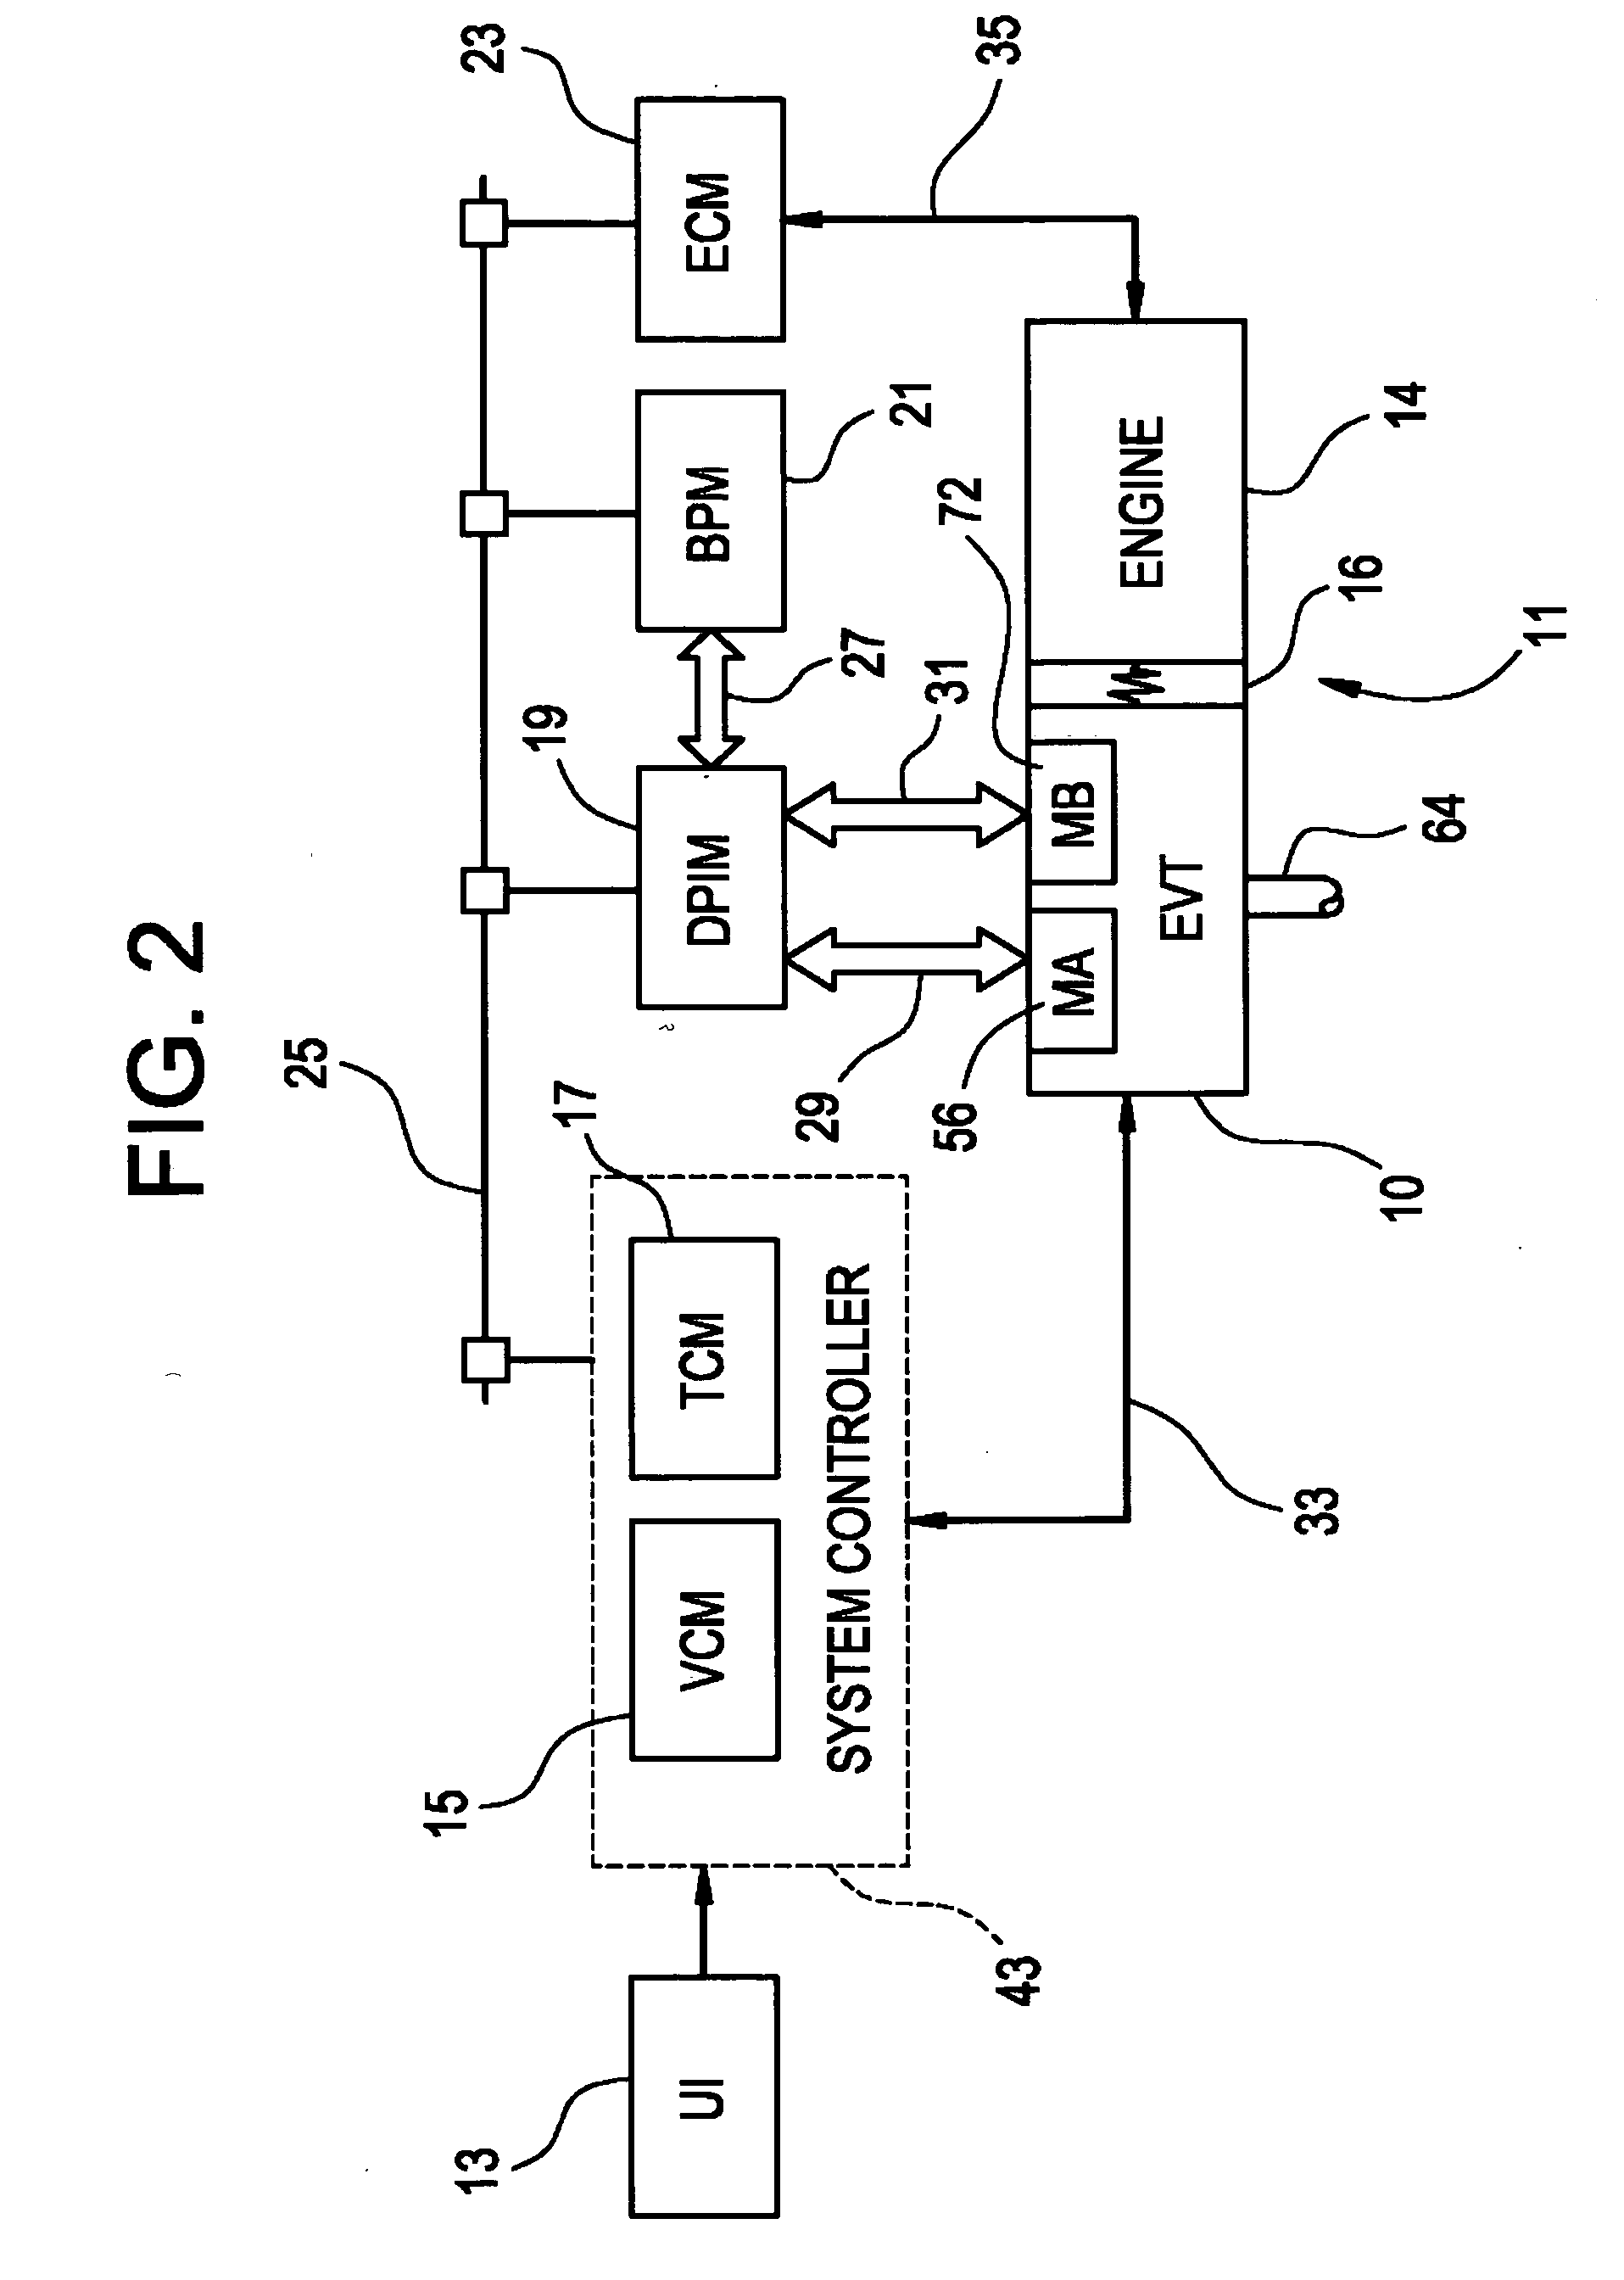 Method of determining battery power limits for an energy storage system of a hybrid electric vehicle